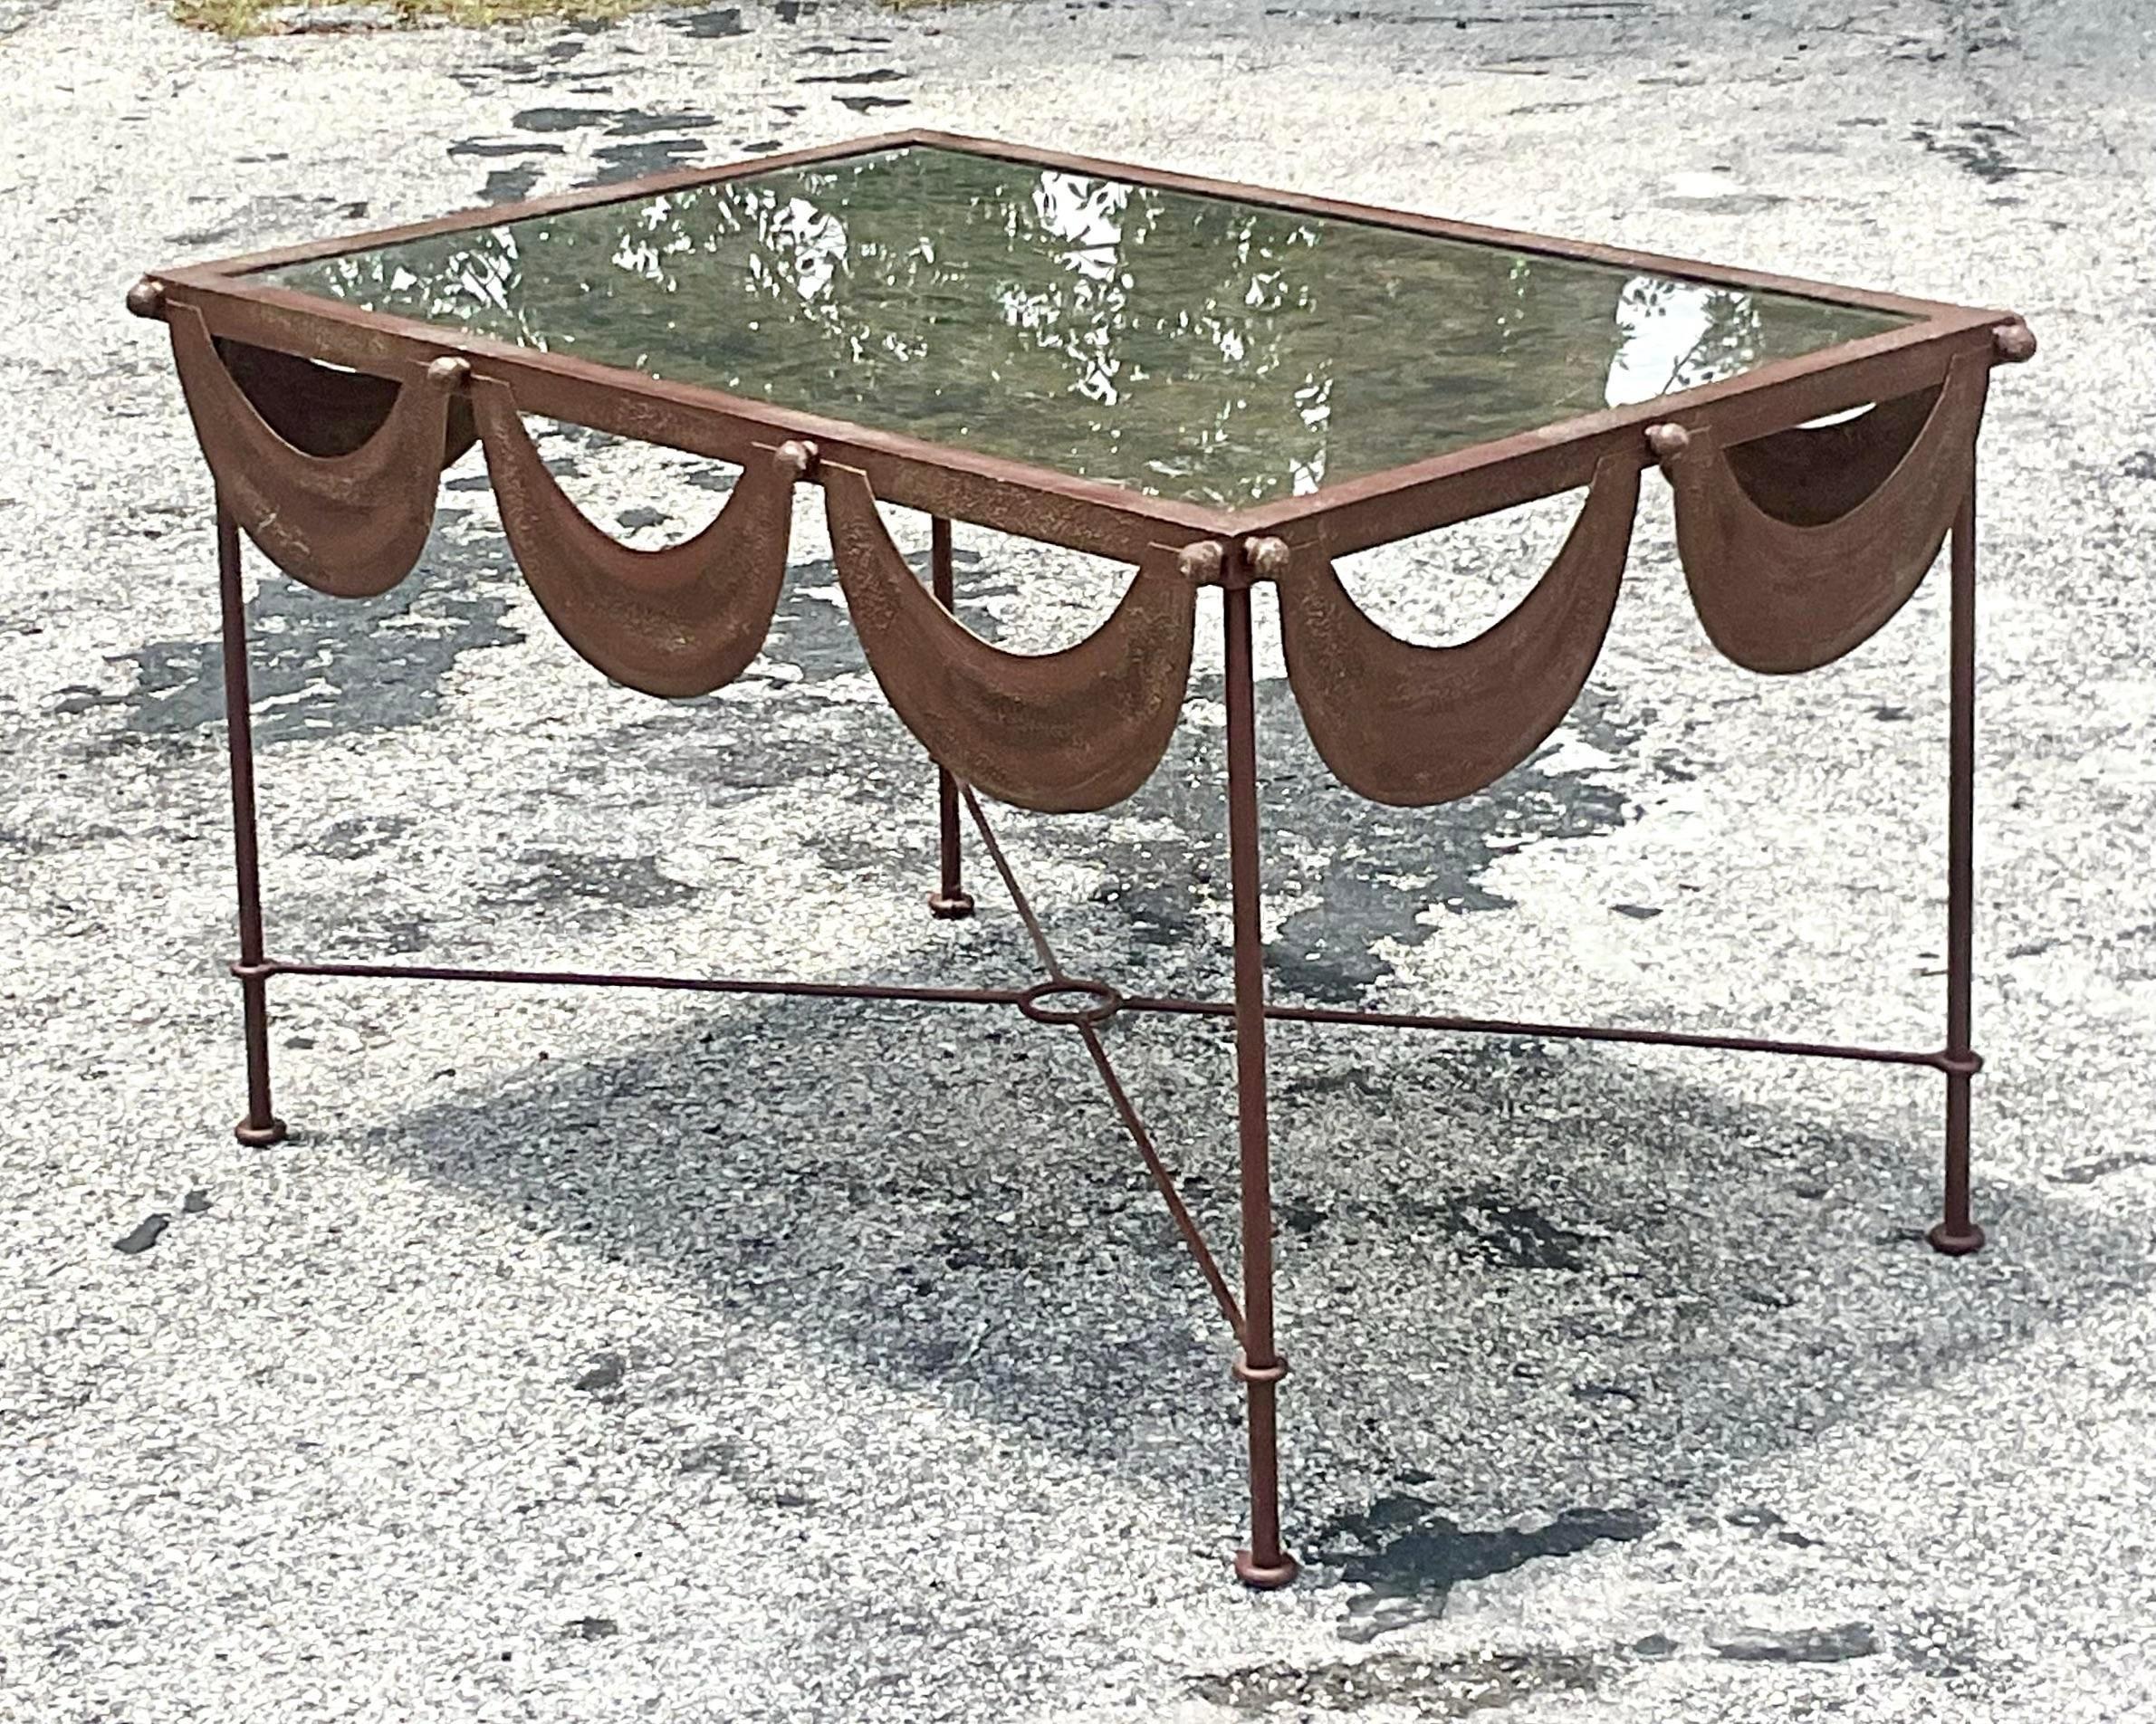 Elevate your living space with our Vintage Regency Patinated Metal Swag Coffee Table. Crafted in the USA, this exquisite piece showcases American craftsmanship at its finest, blending regal elegance with a touch of vintage allure to create a